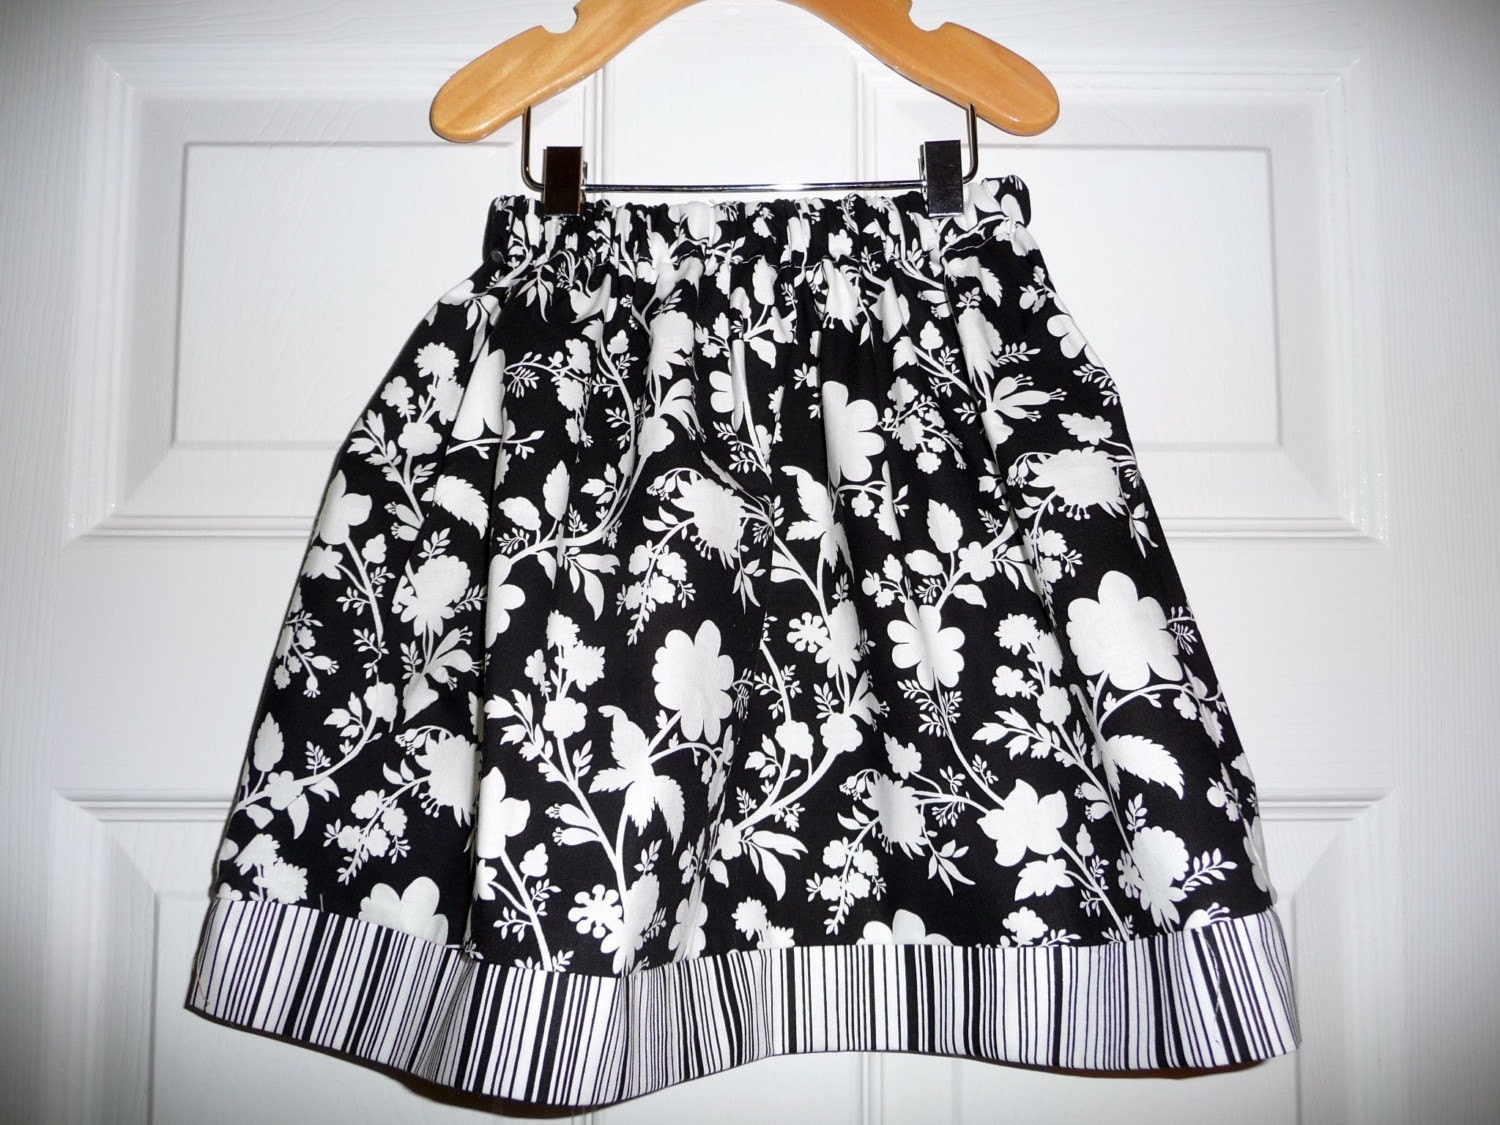 SAMPLE Children Skirt Will fit Size 2T / 3T / 4T by